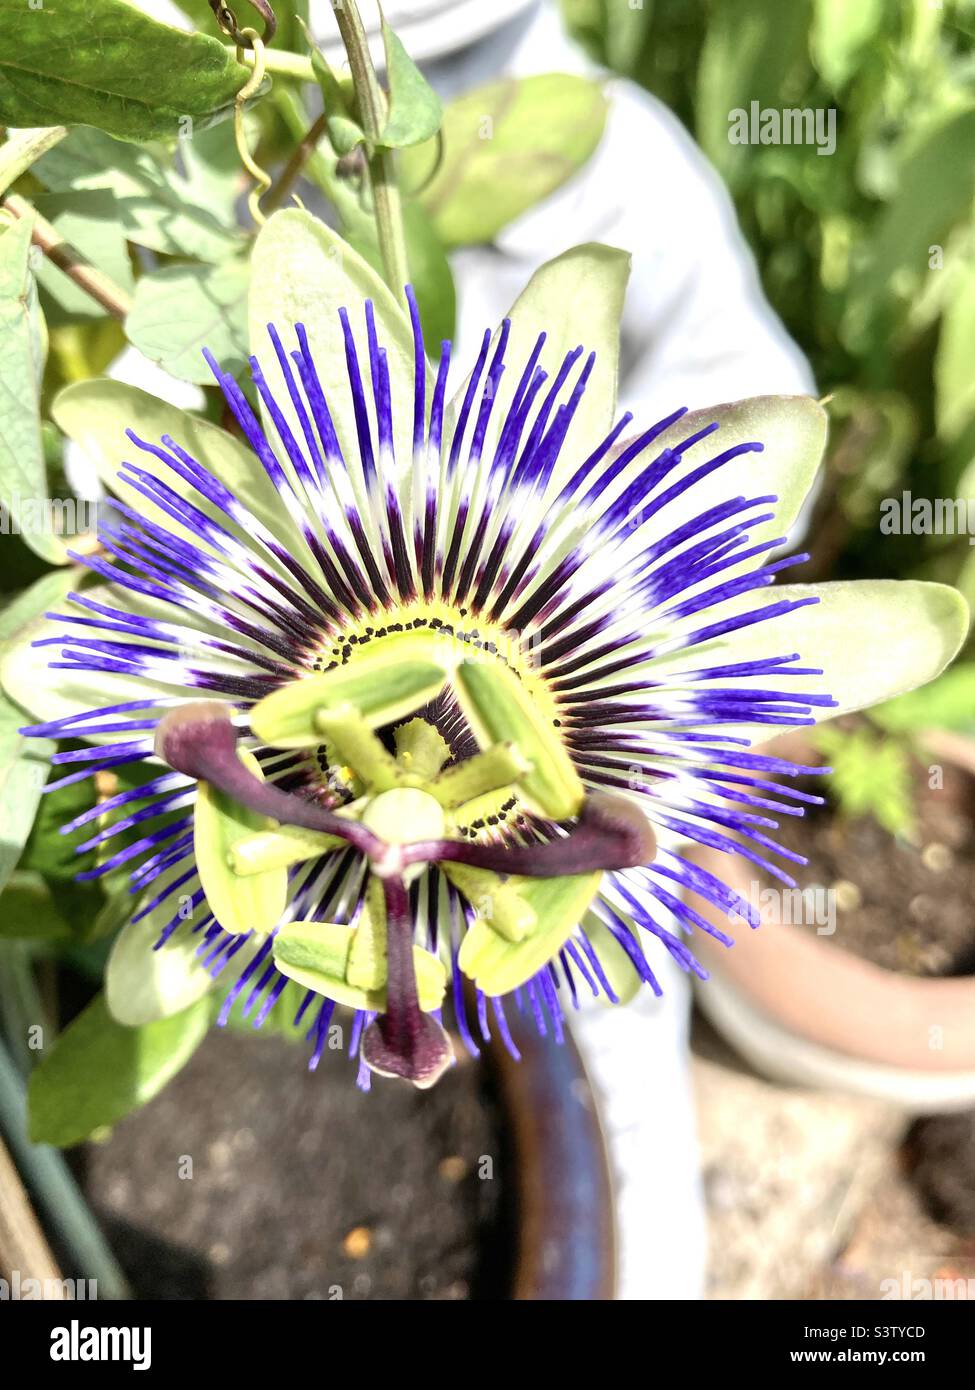 Passion flower in bloom Stock Photo